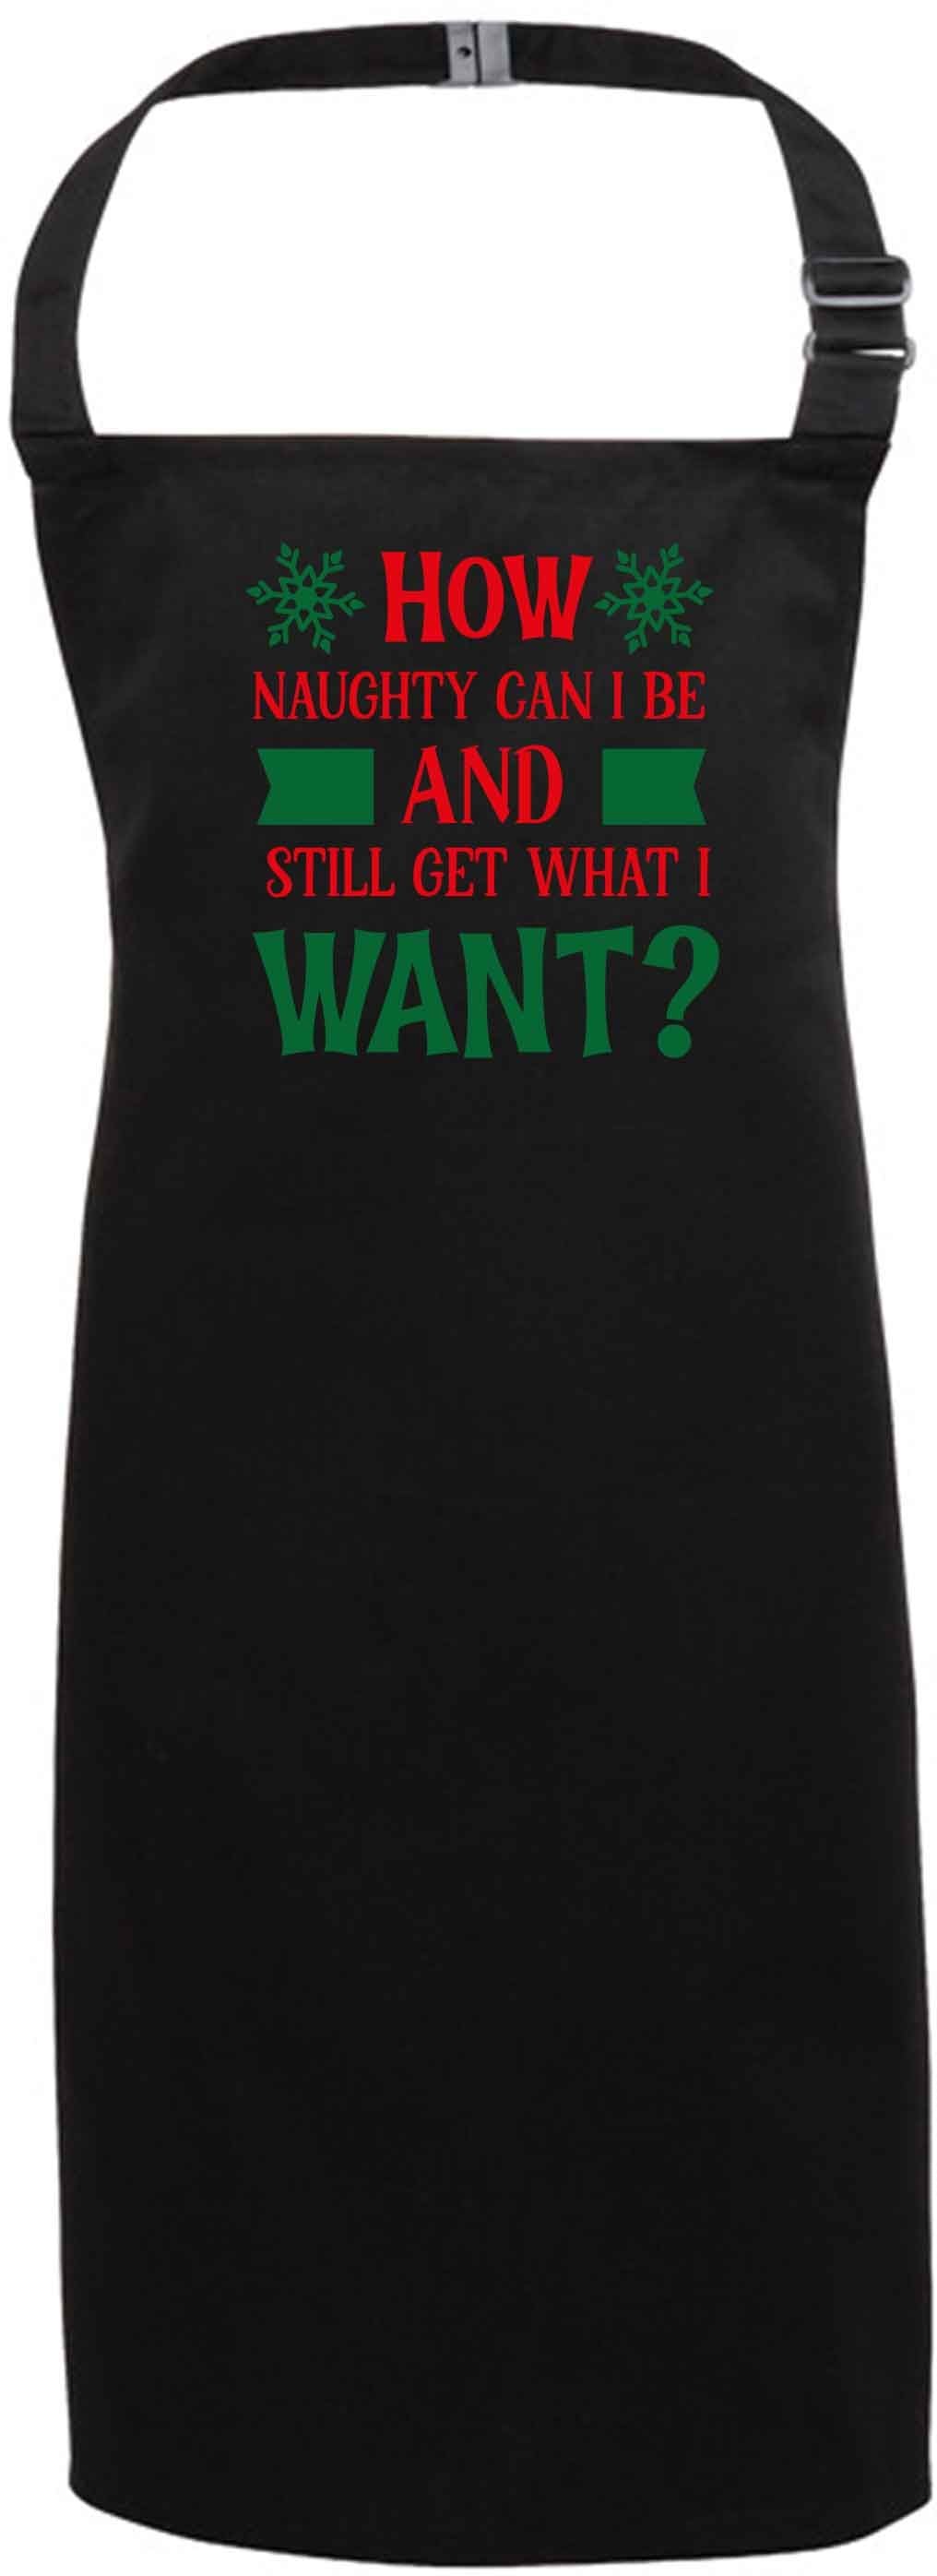 How naughty can I be and still get what I want? black apron 7-10 years